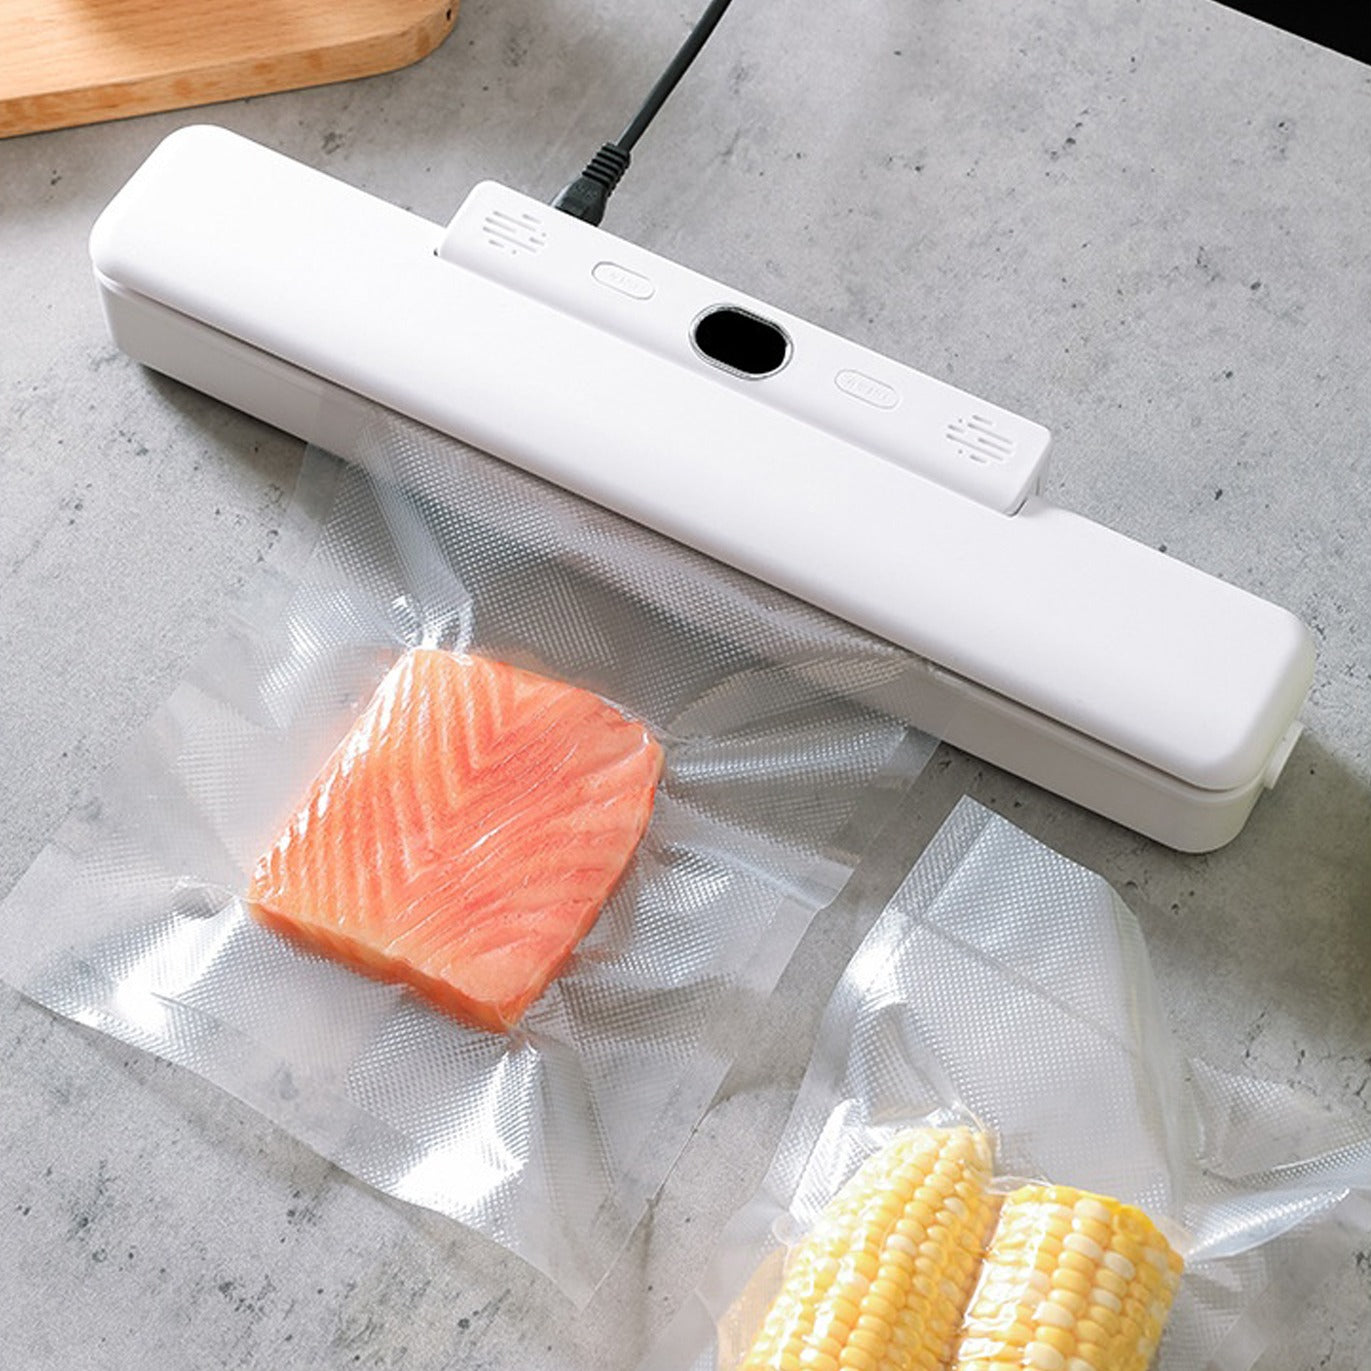 Automatic Food Vacuum Sealer placed on the table next to some covers that were sealed with it